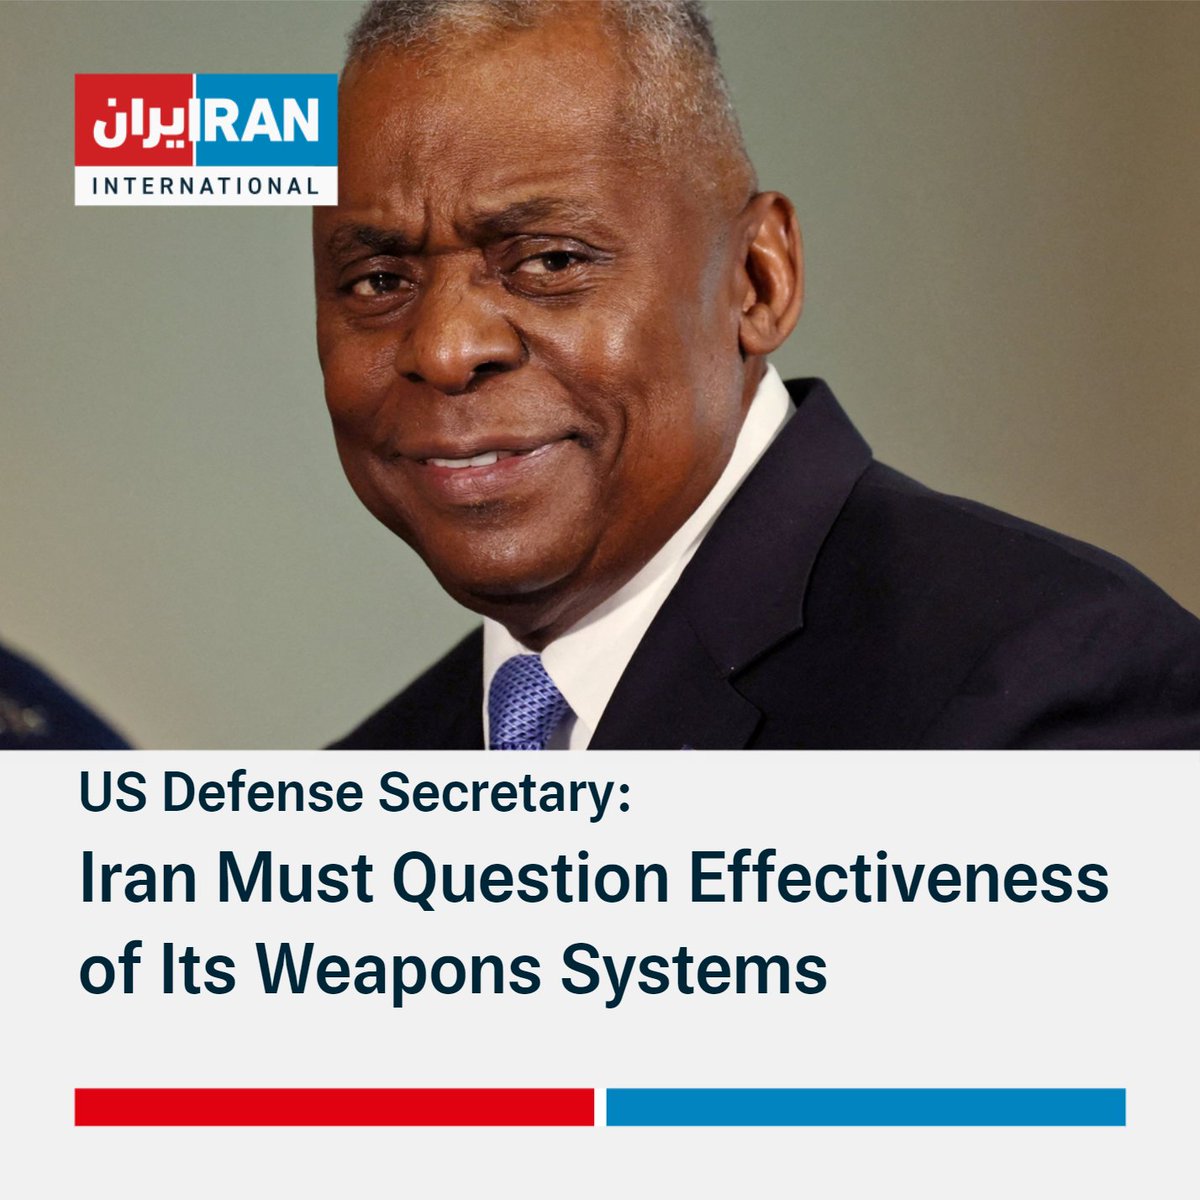 US Defense Secretary Lloyd Austin says that Iran should question the effectiveness of its weapons systems after its failed attack on Israel earlier this month. “They should be questioning the effectiveness of their weapons systems and their planning,” Austin tells reporters.…